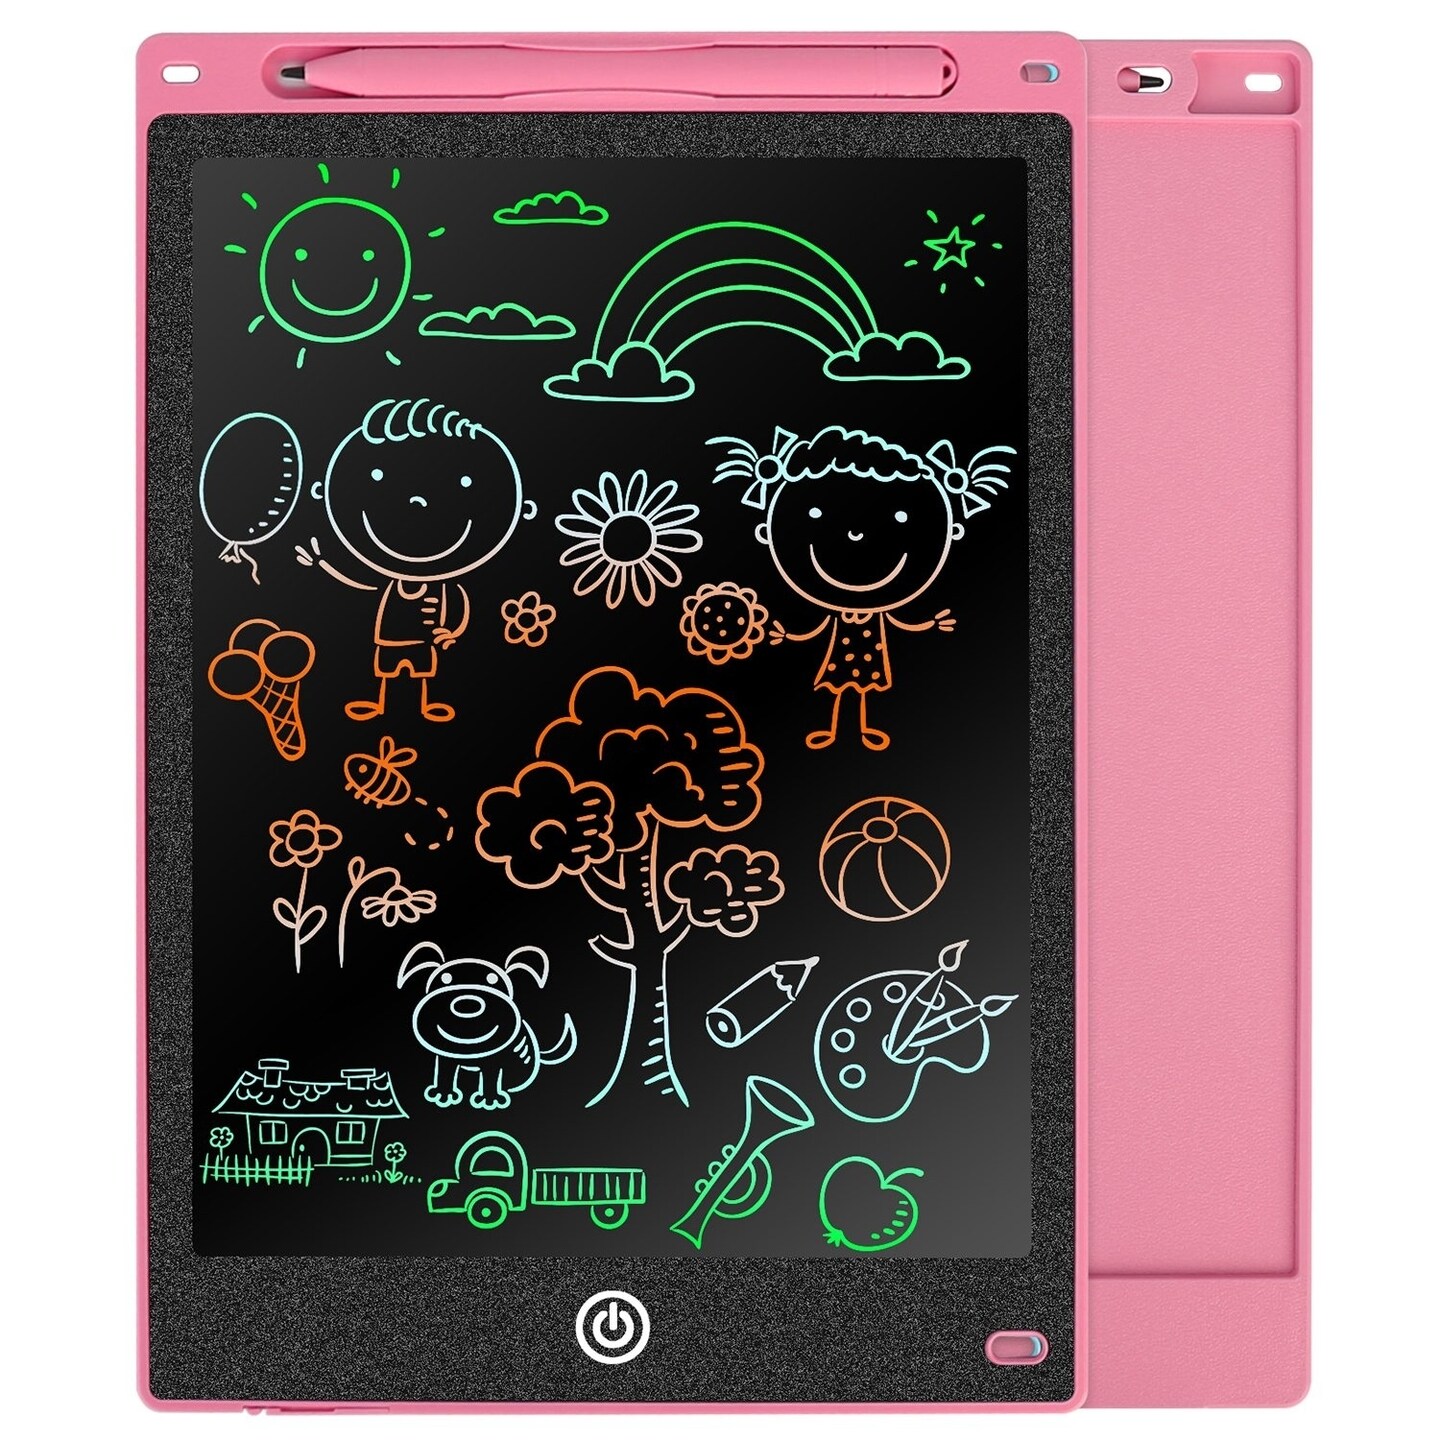 Global Phoenix 8.5in LCD Writing Tablet Electronic Colorful Graphic Doodle Board Kid Educational Learning Mini Drawing Pad with Lock